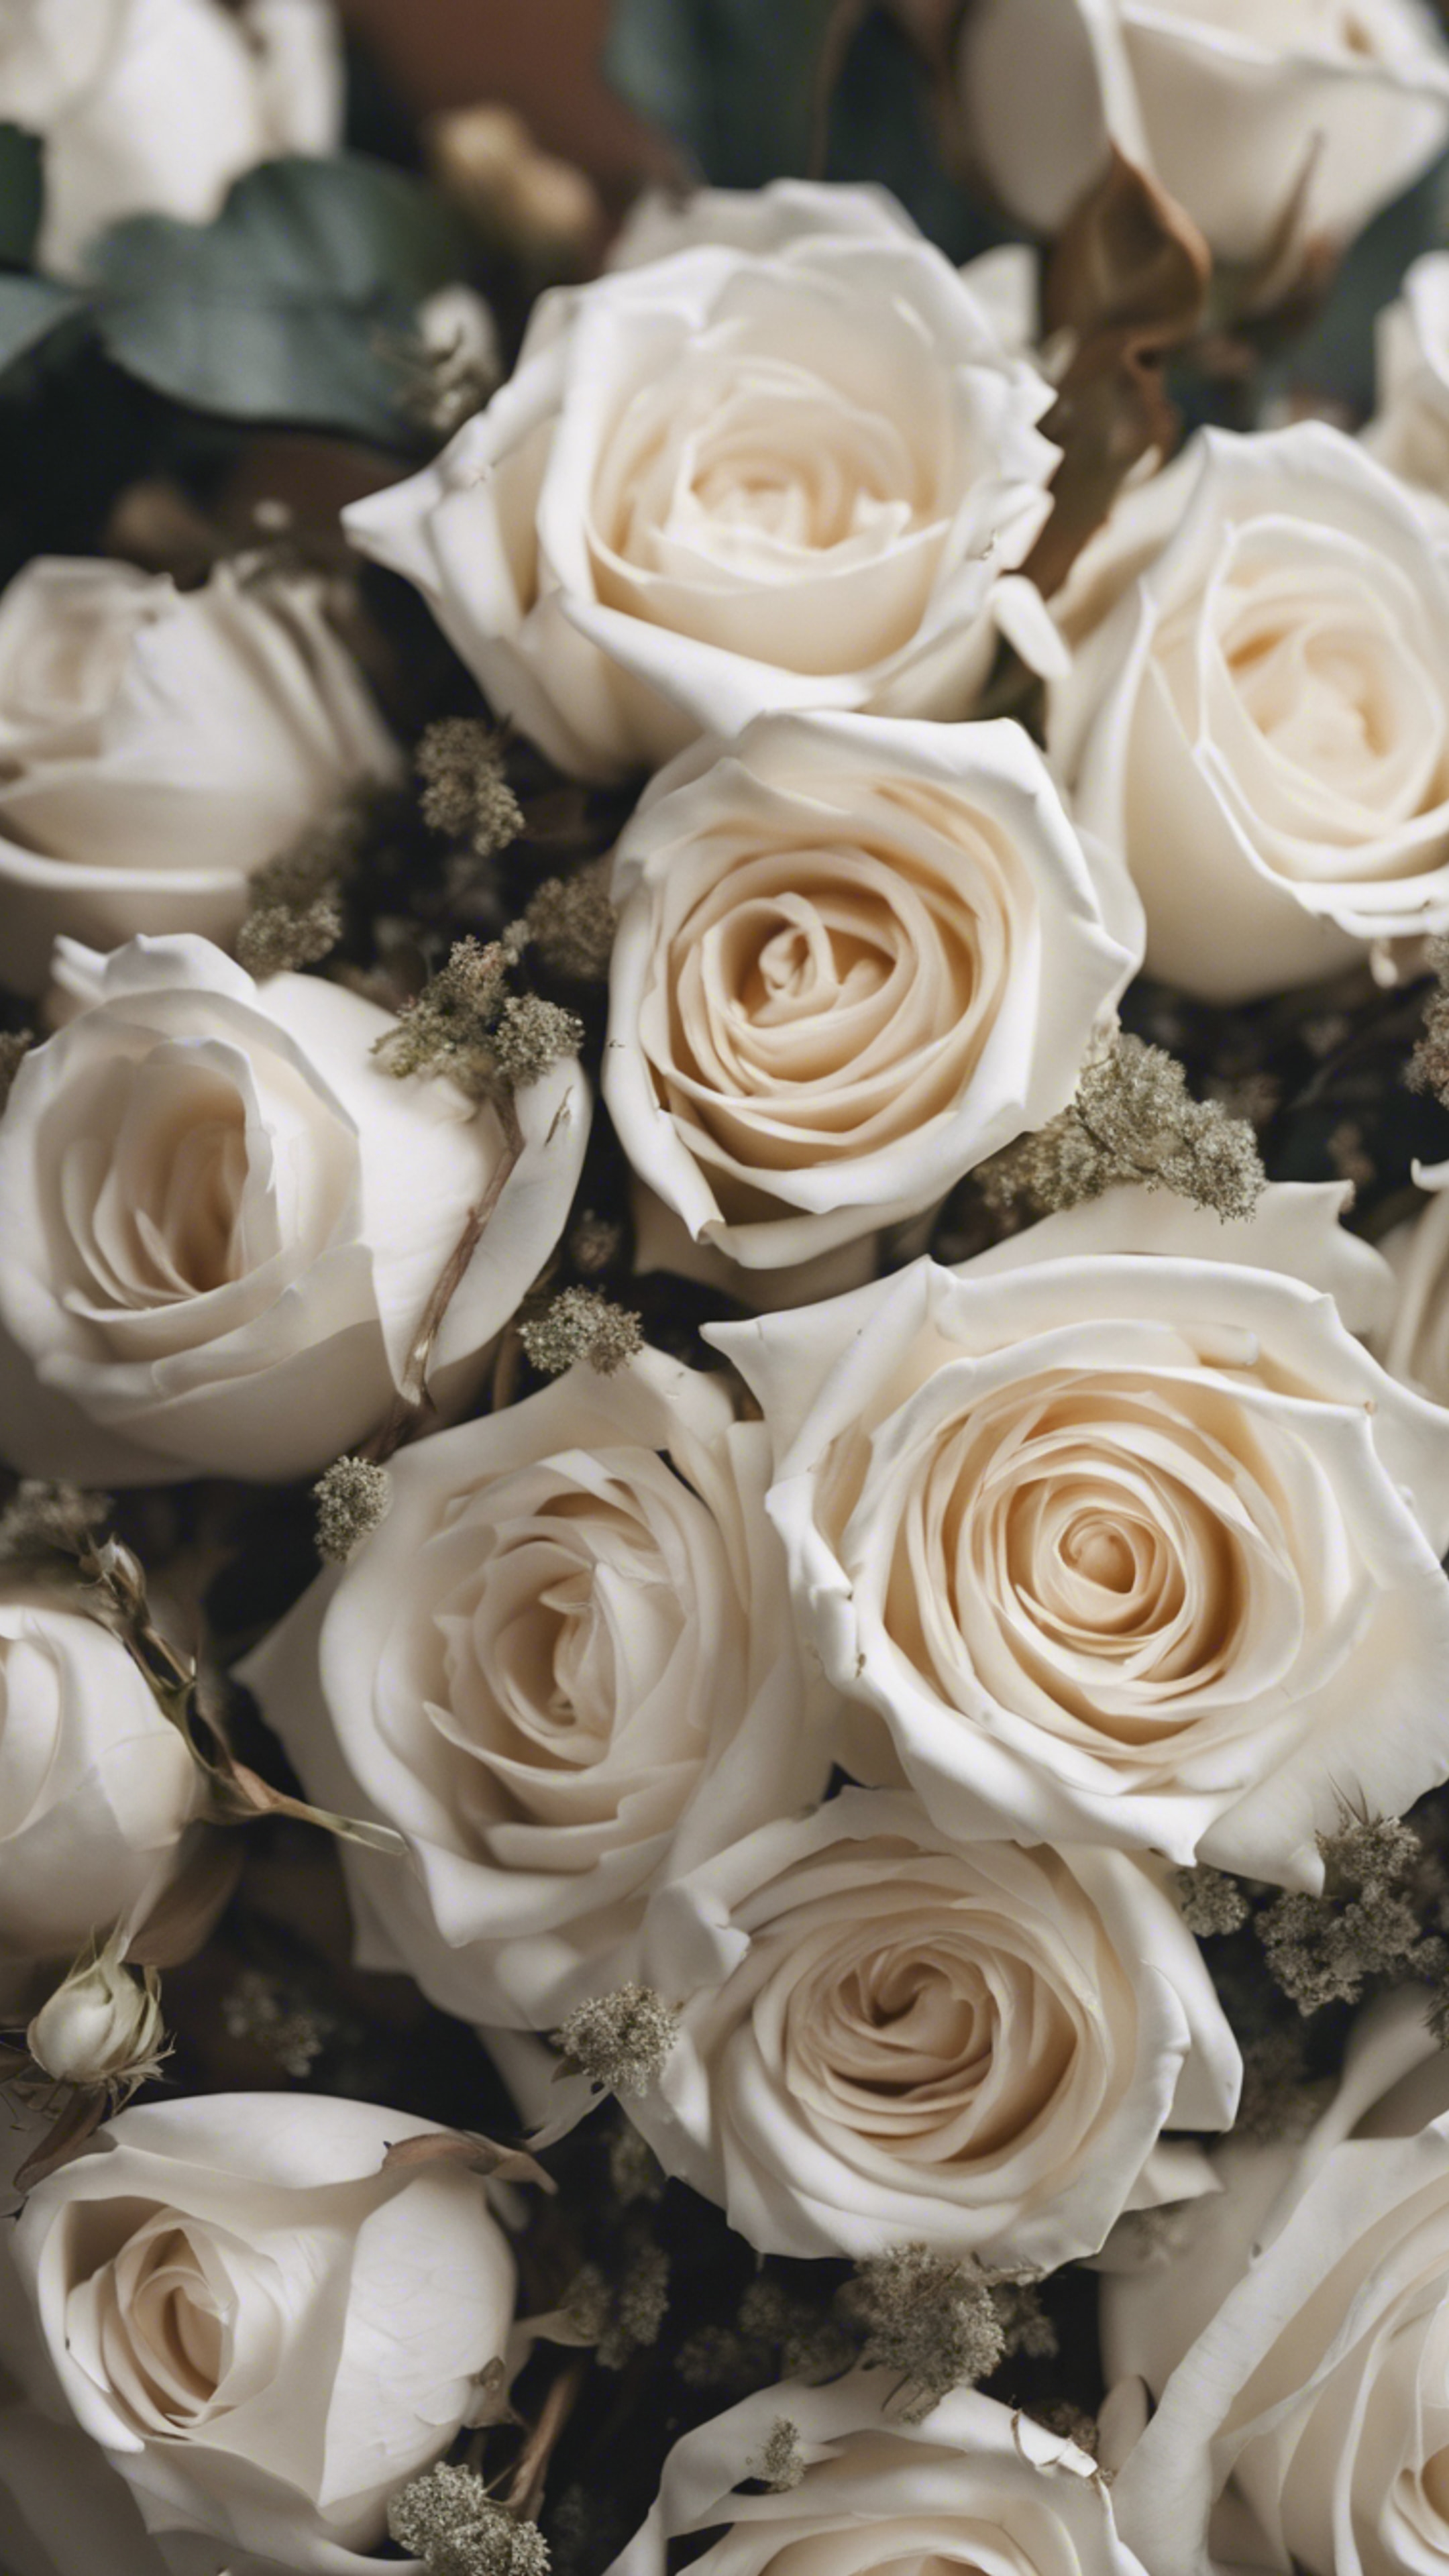 White roses adorning a rustic brown haired bride bouquet. Wallpaper[a0aa9f1e4f6d44229c70]